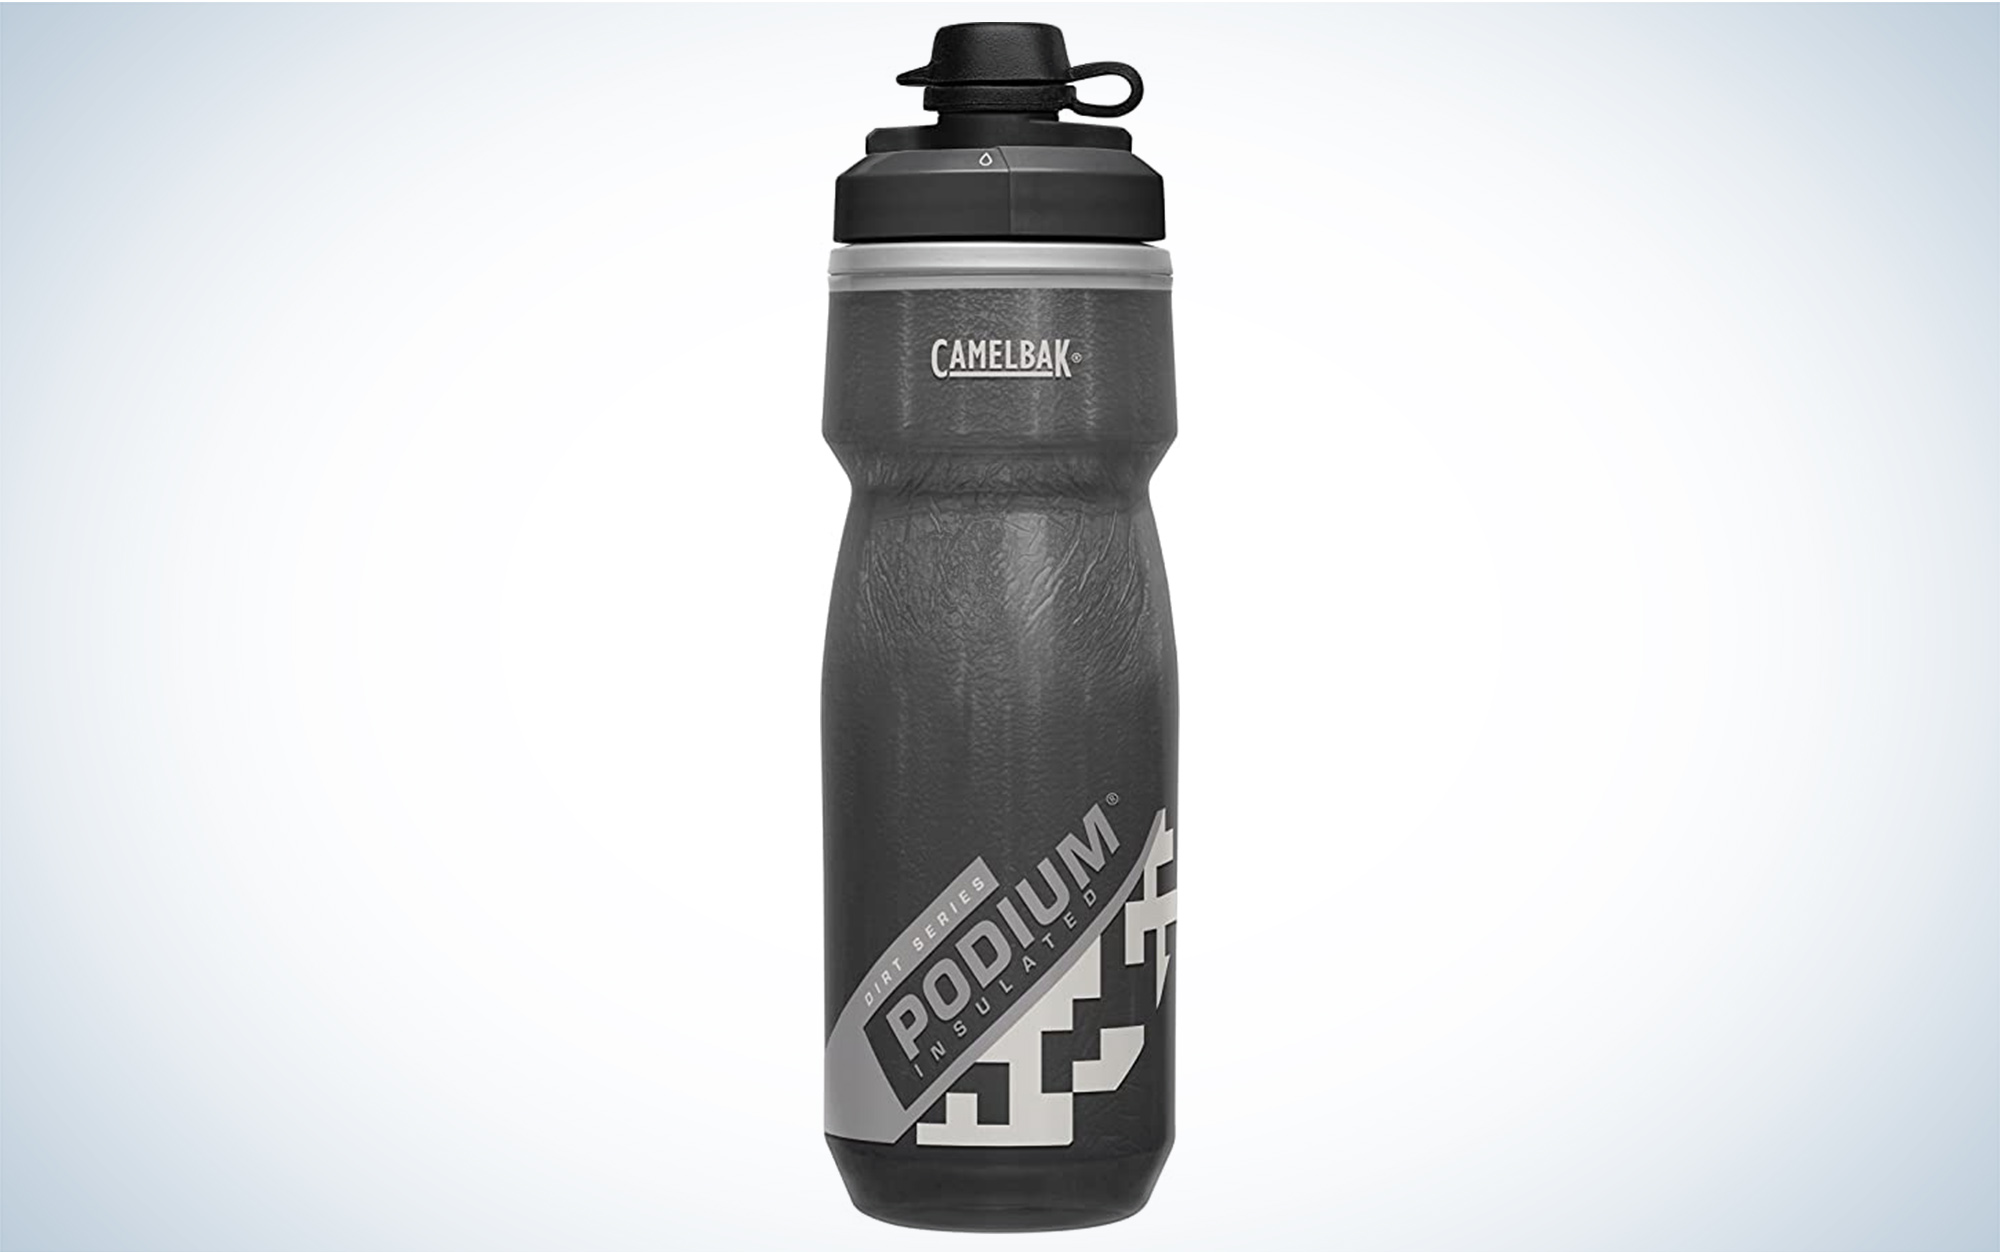 The CamelBak Podium is a squeeze water bottle